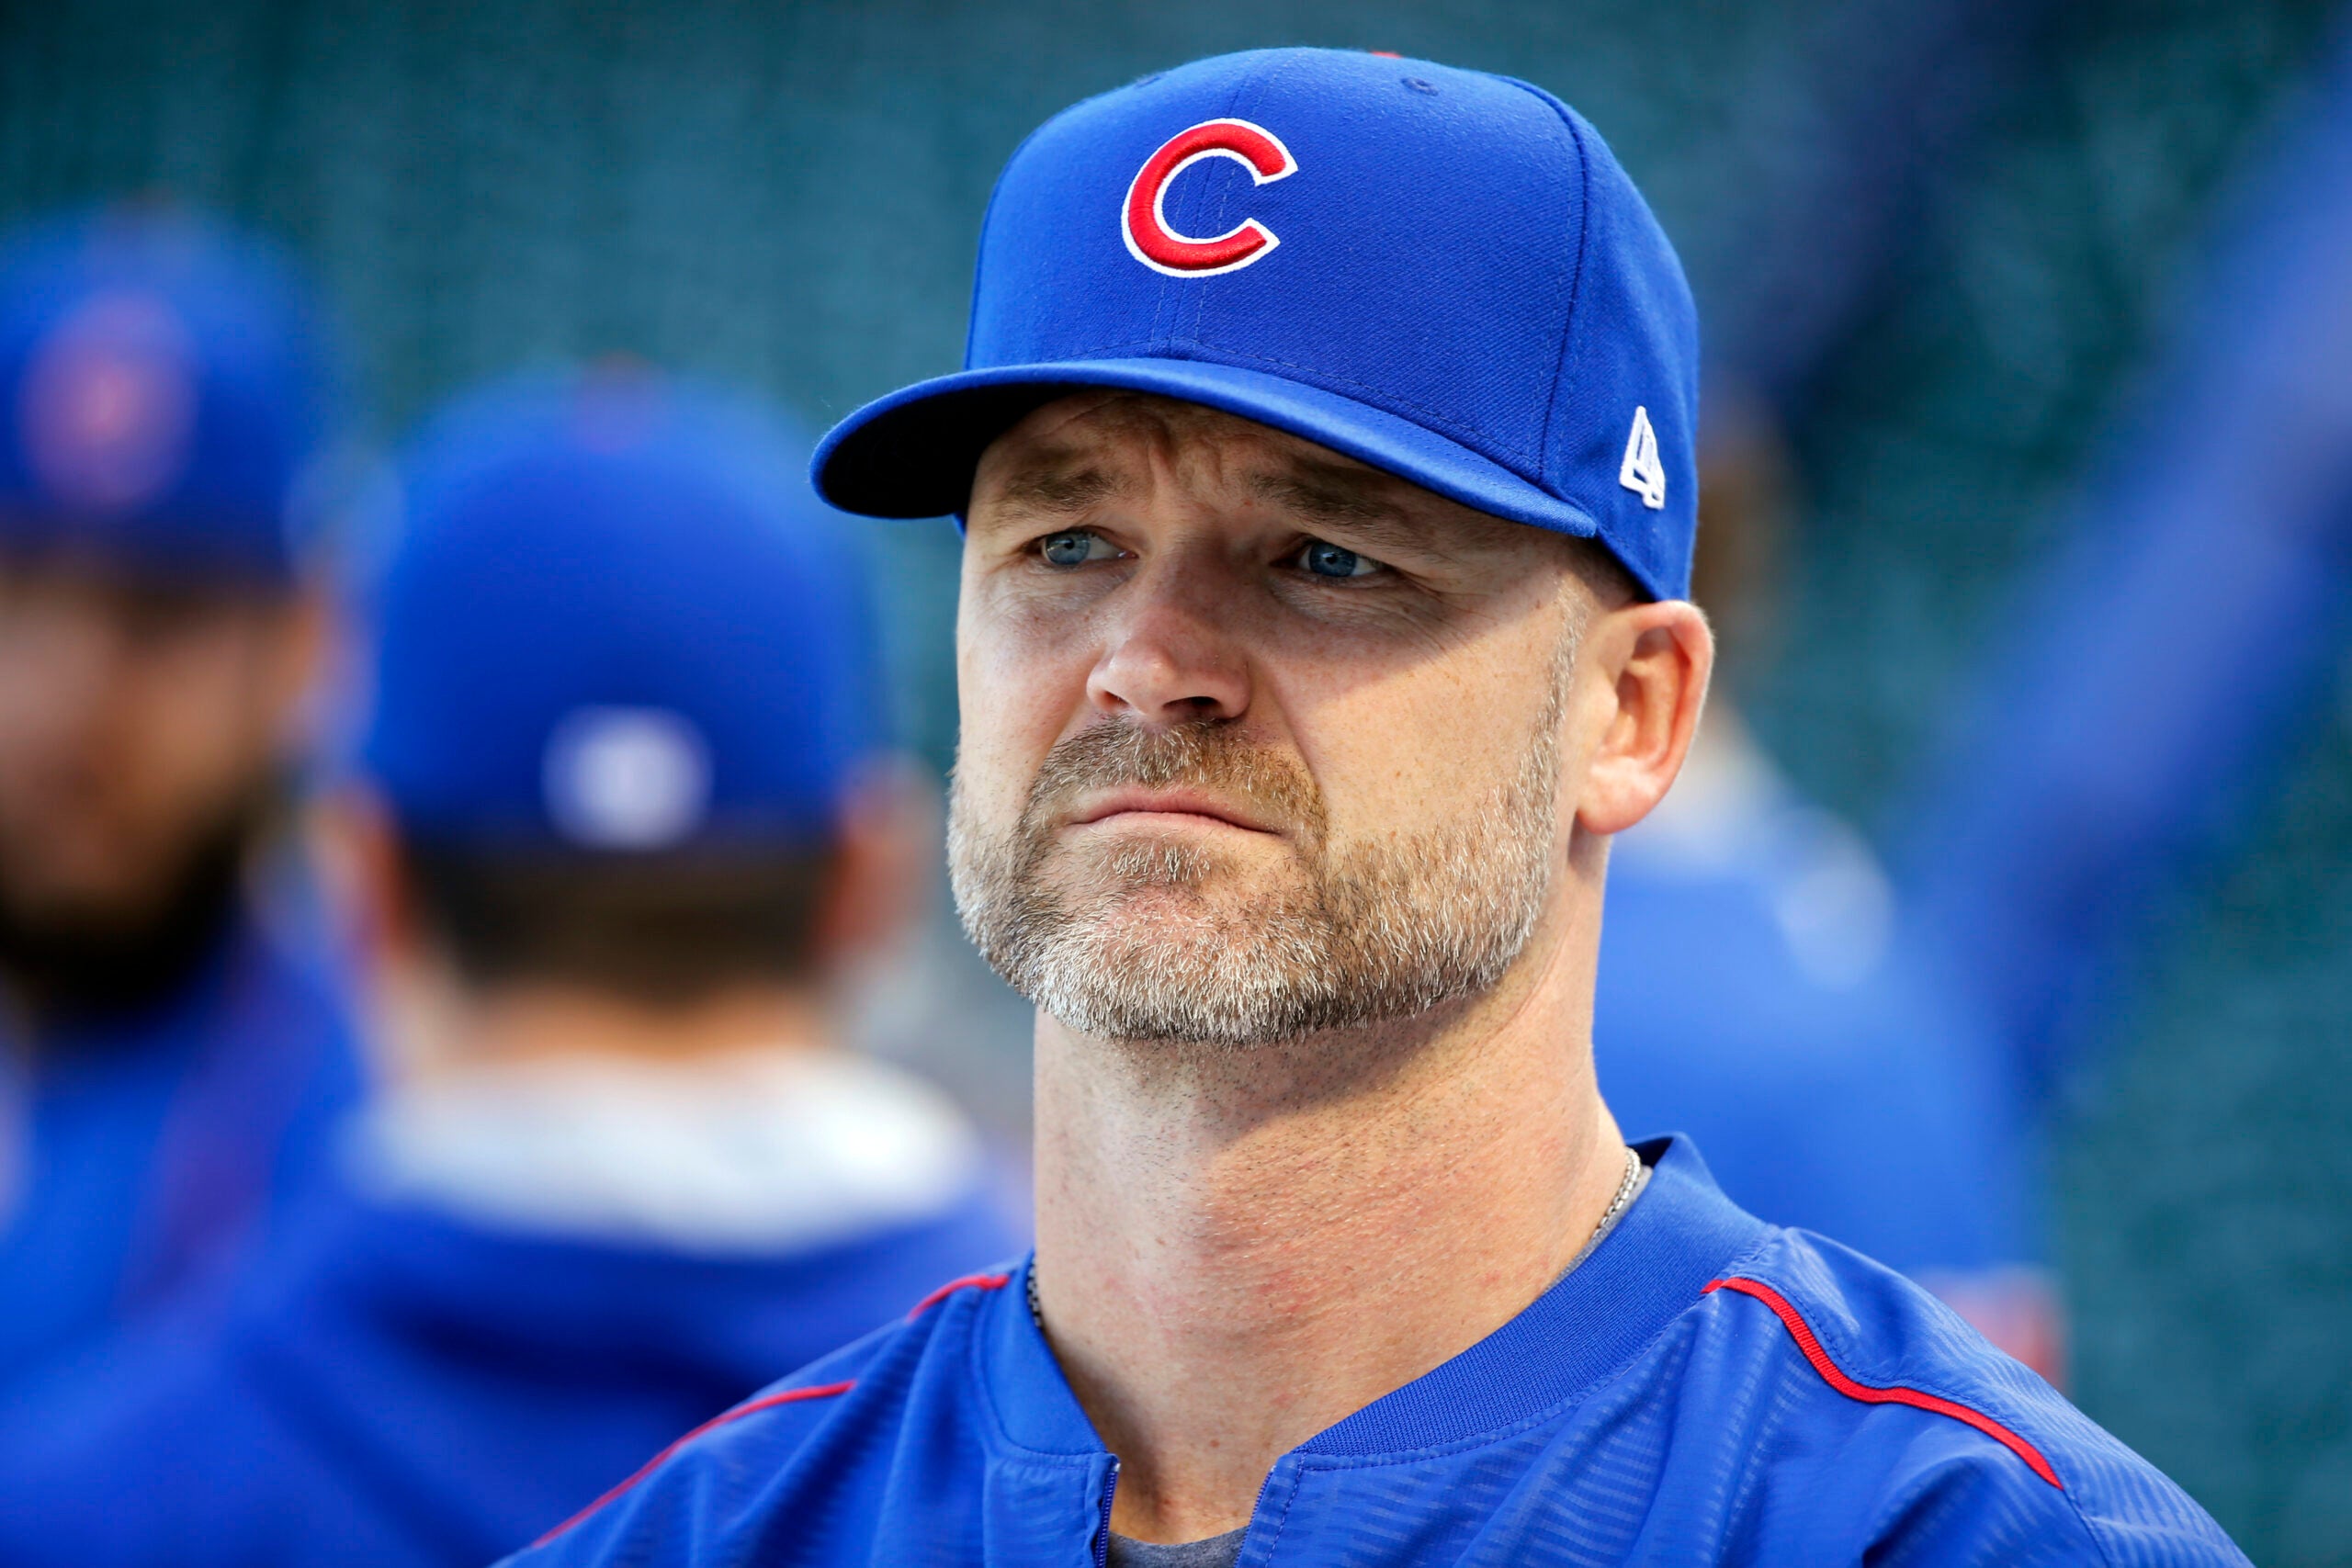 He's our guy': Cubs back David Ross as manager - CHGO